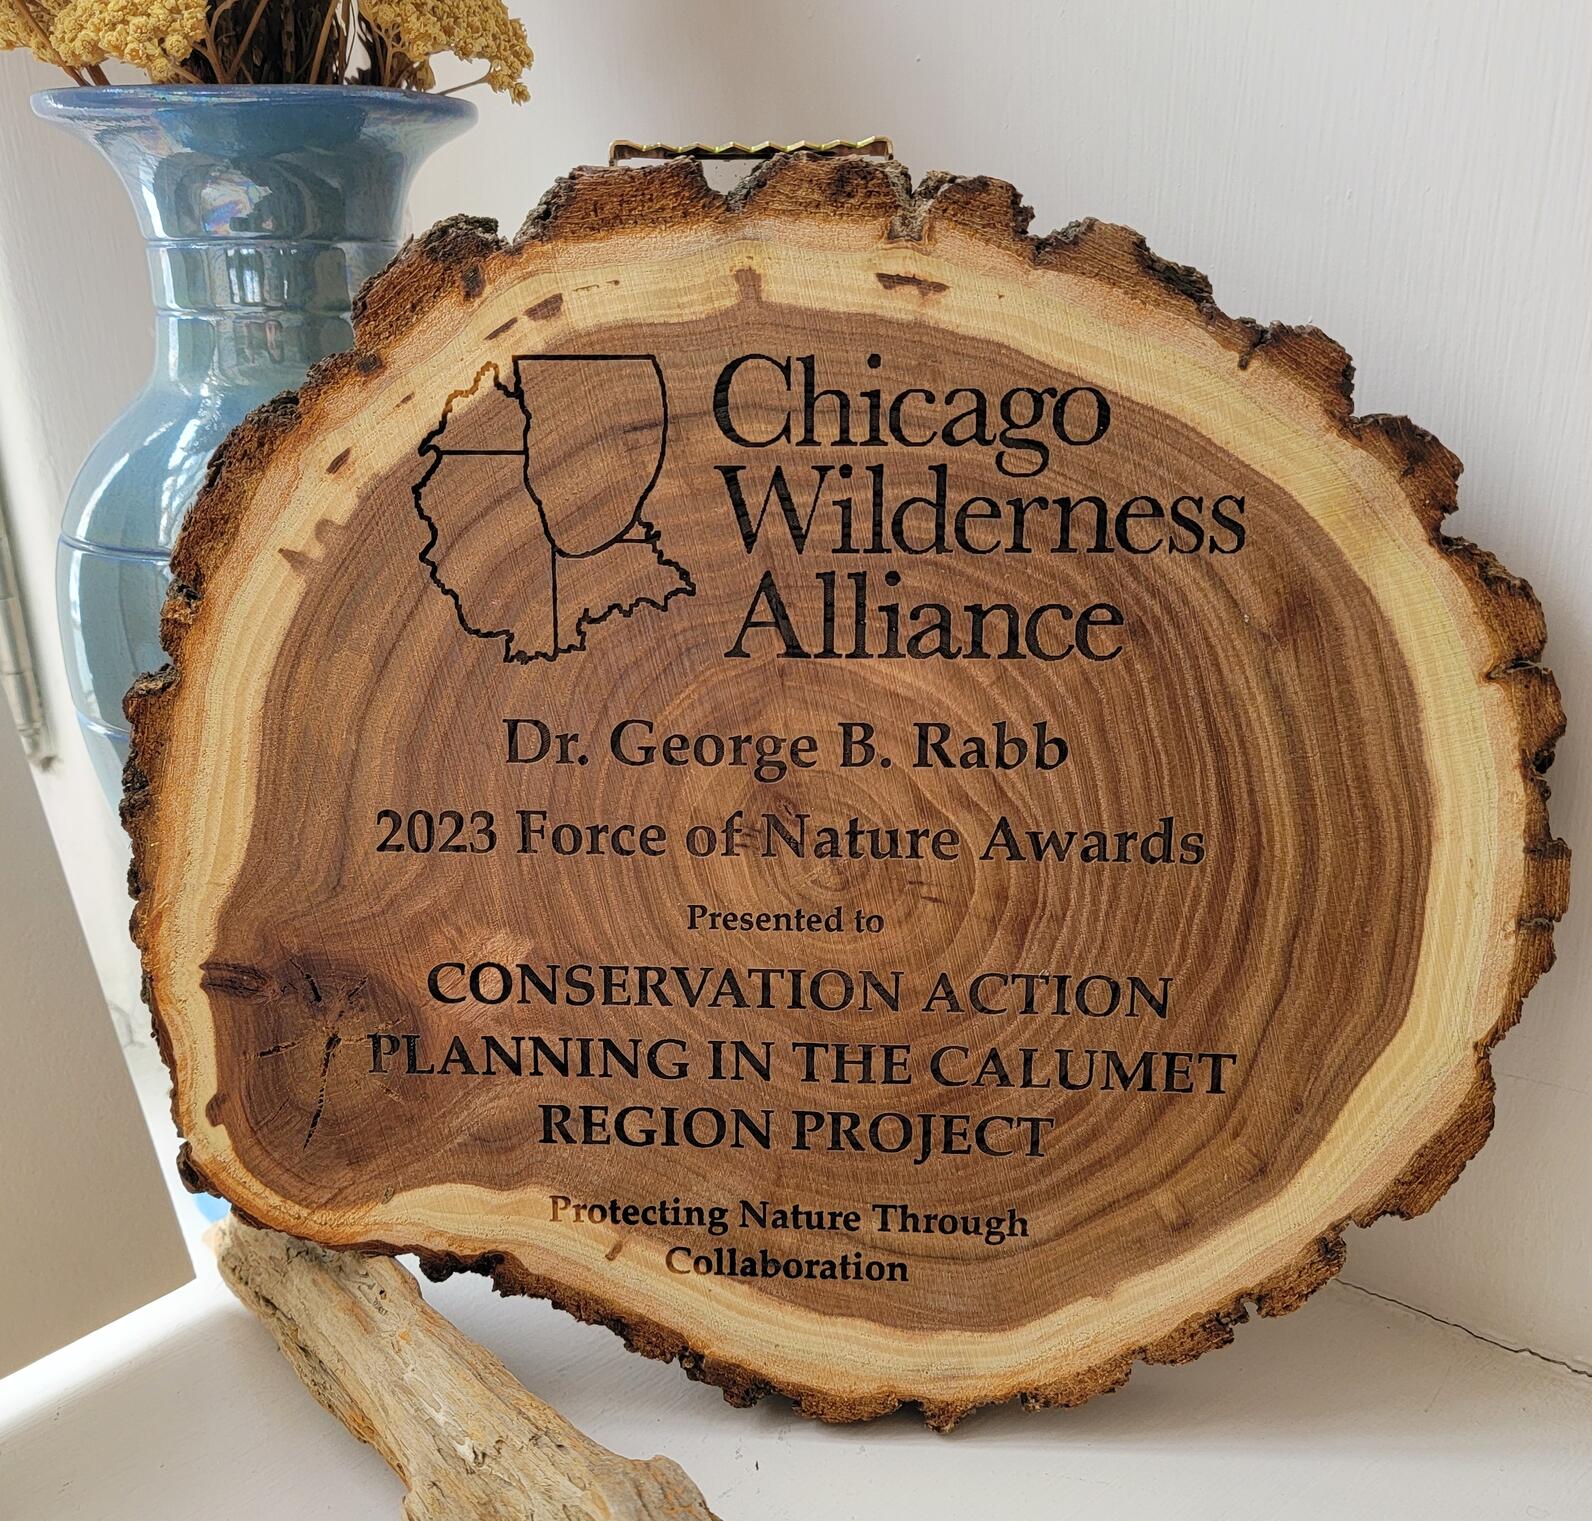 The Chicago Wilderness Alliance Dr. George B. Rabb 2023 Force of Nature Award. 